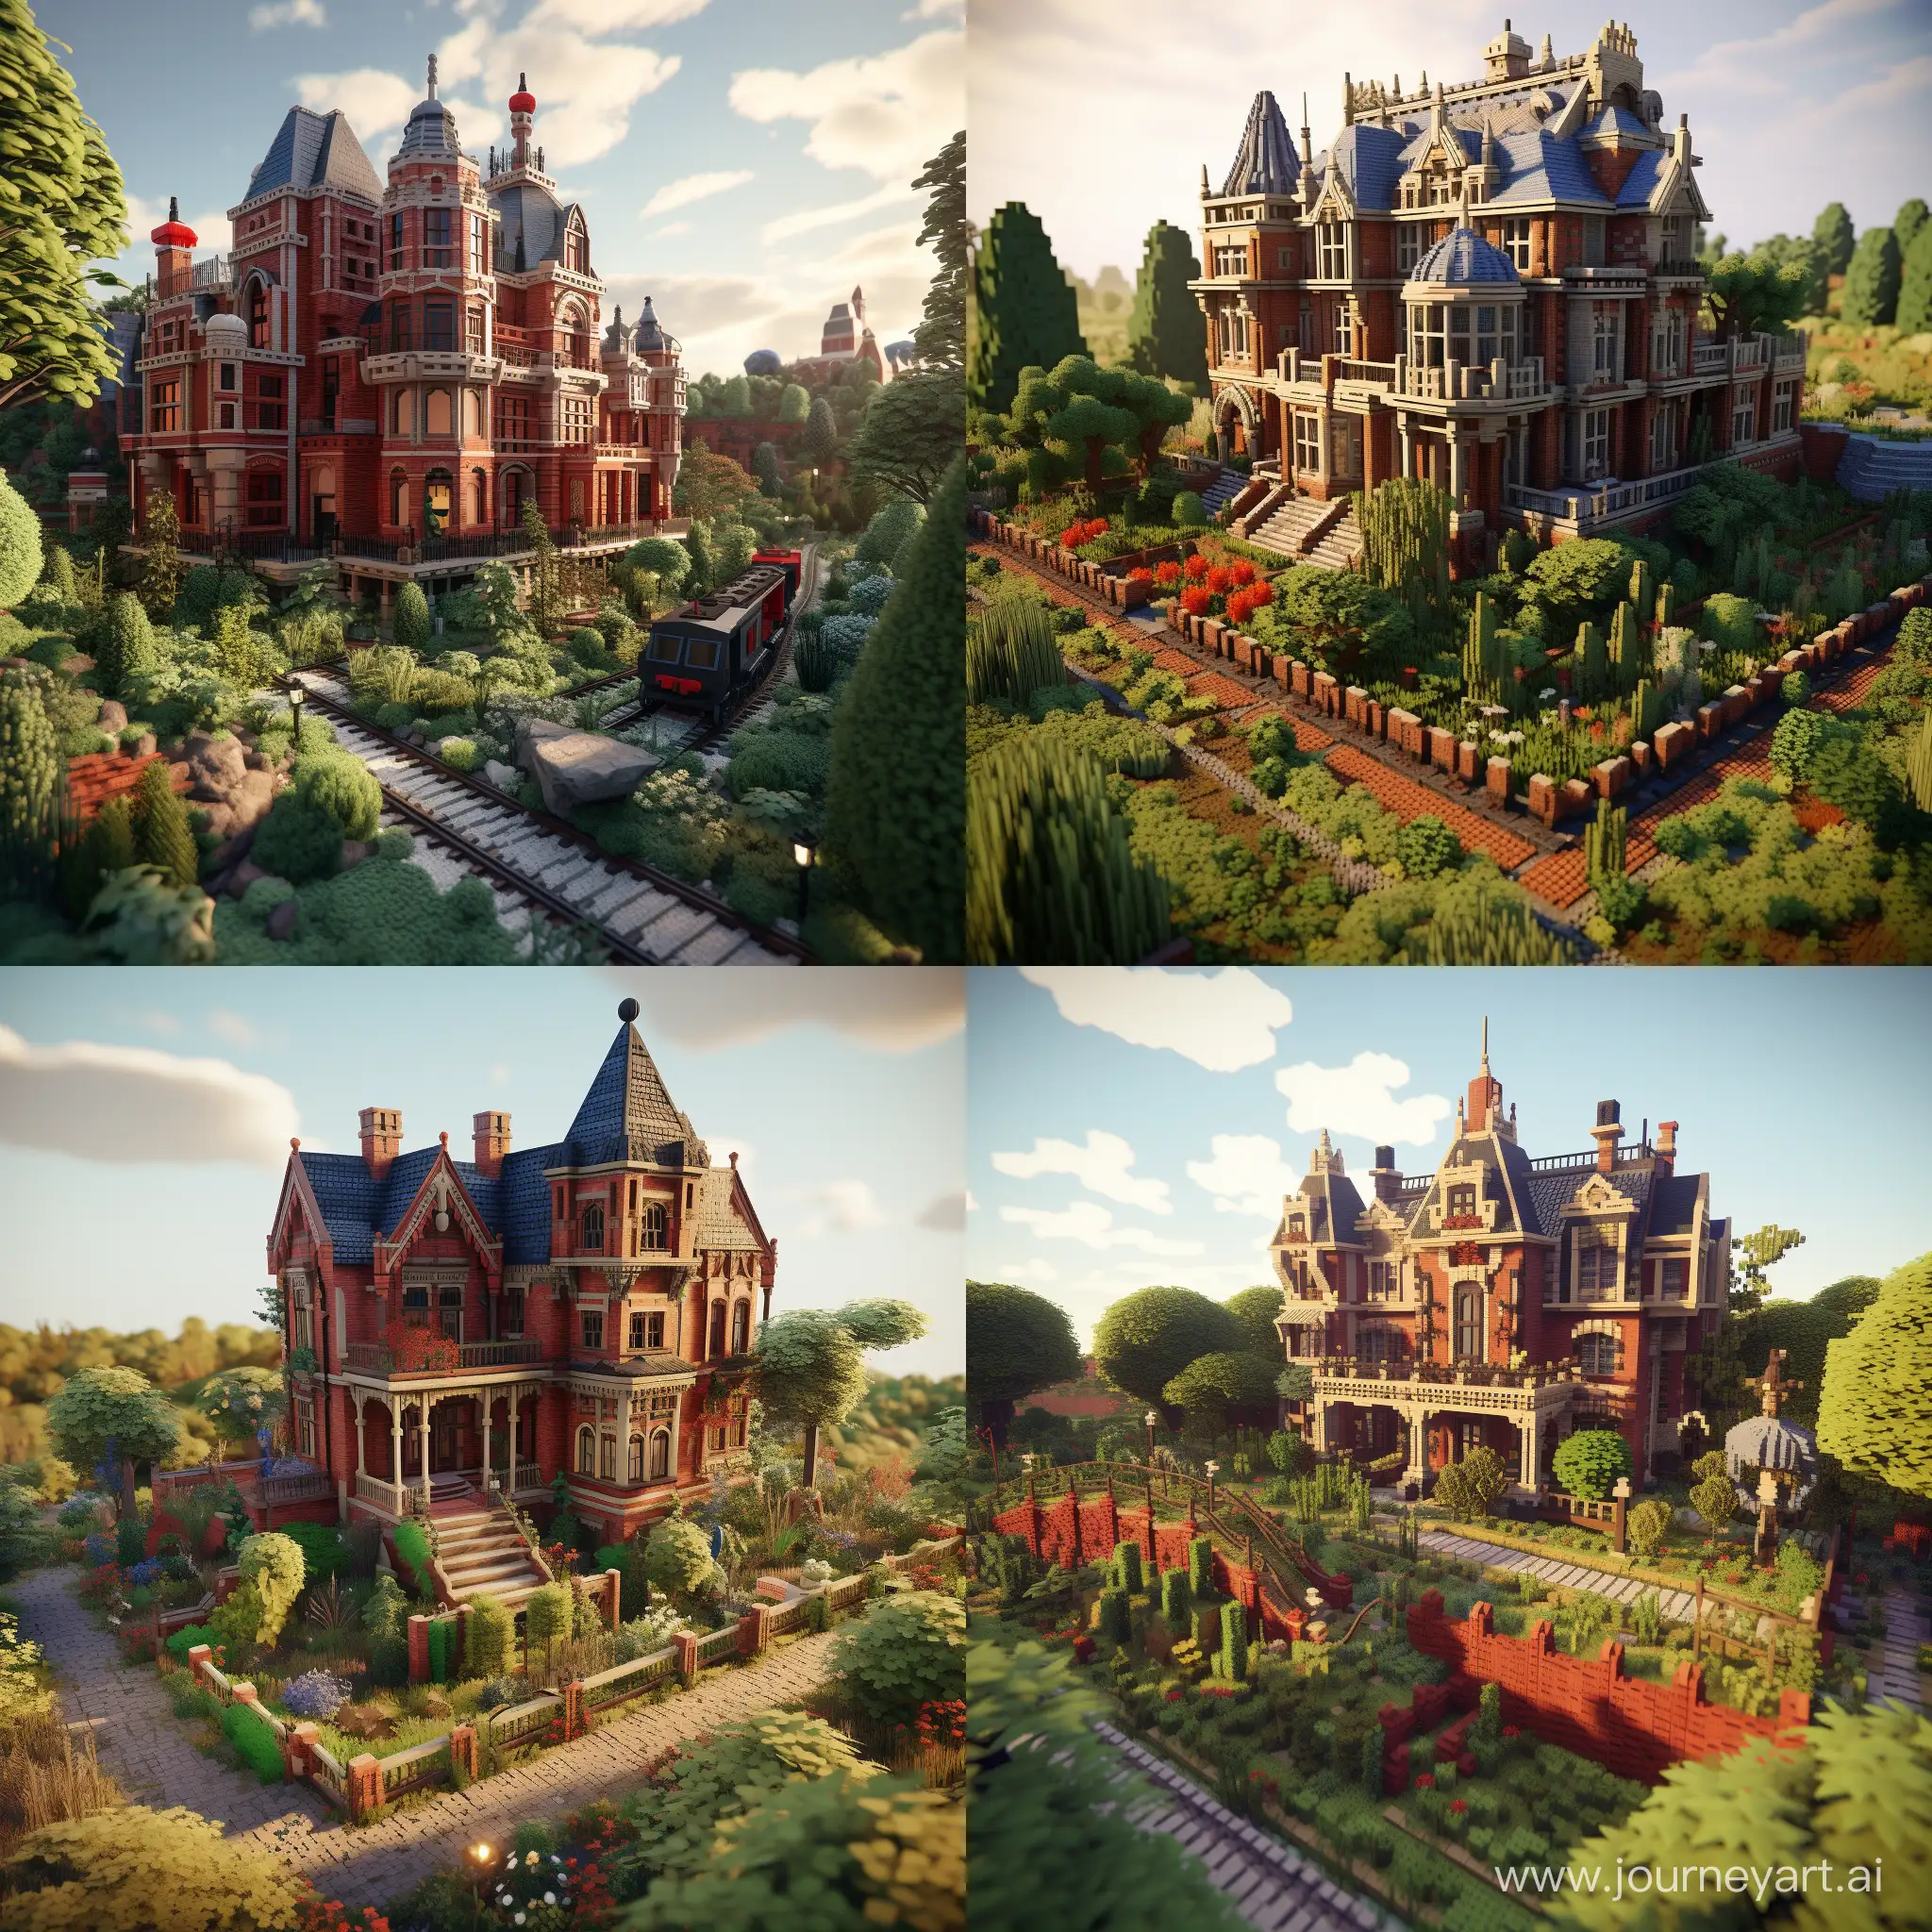 make a minecfrafty victorian house with redbricks, make it big with a garden on top of a small hill with a train track coming in front of it